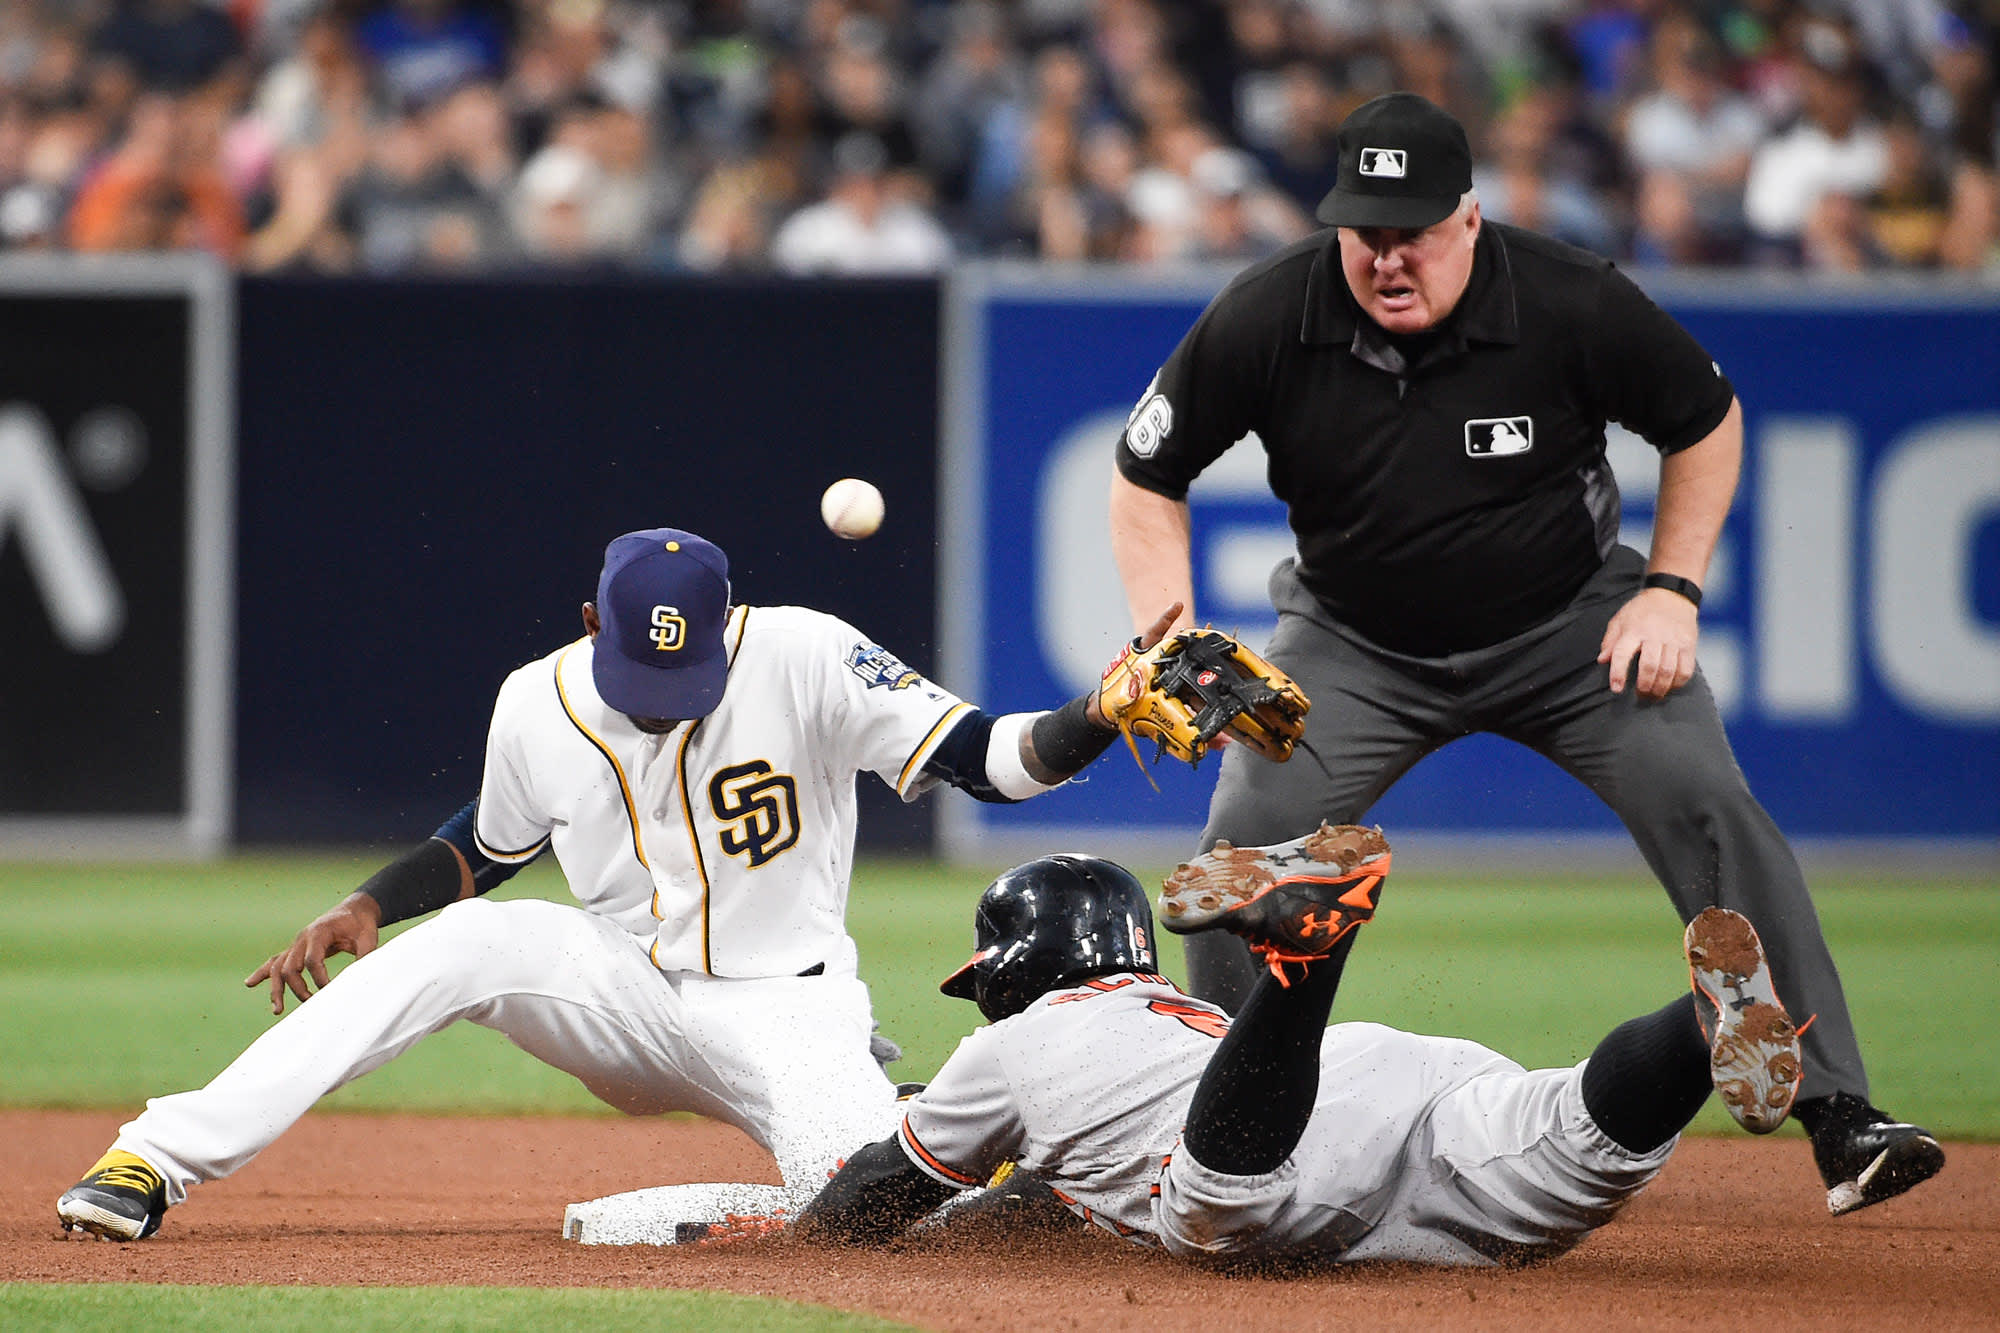 In Defense of Umpires: Why Complaints About MLB's 'Ump Show